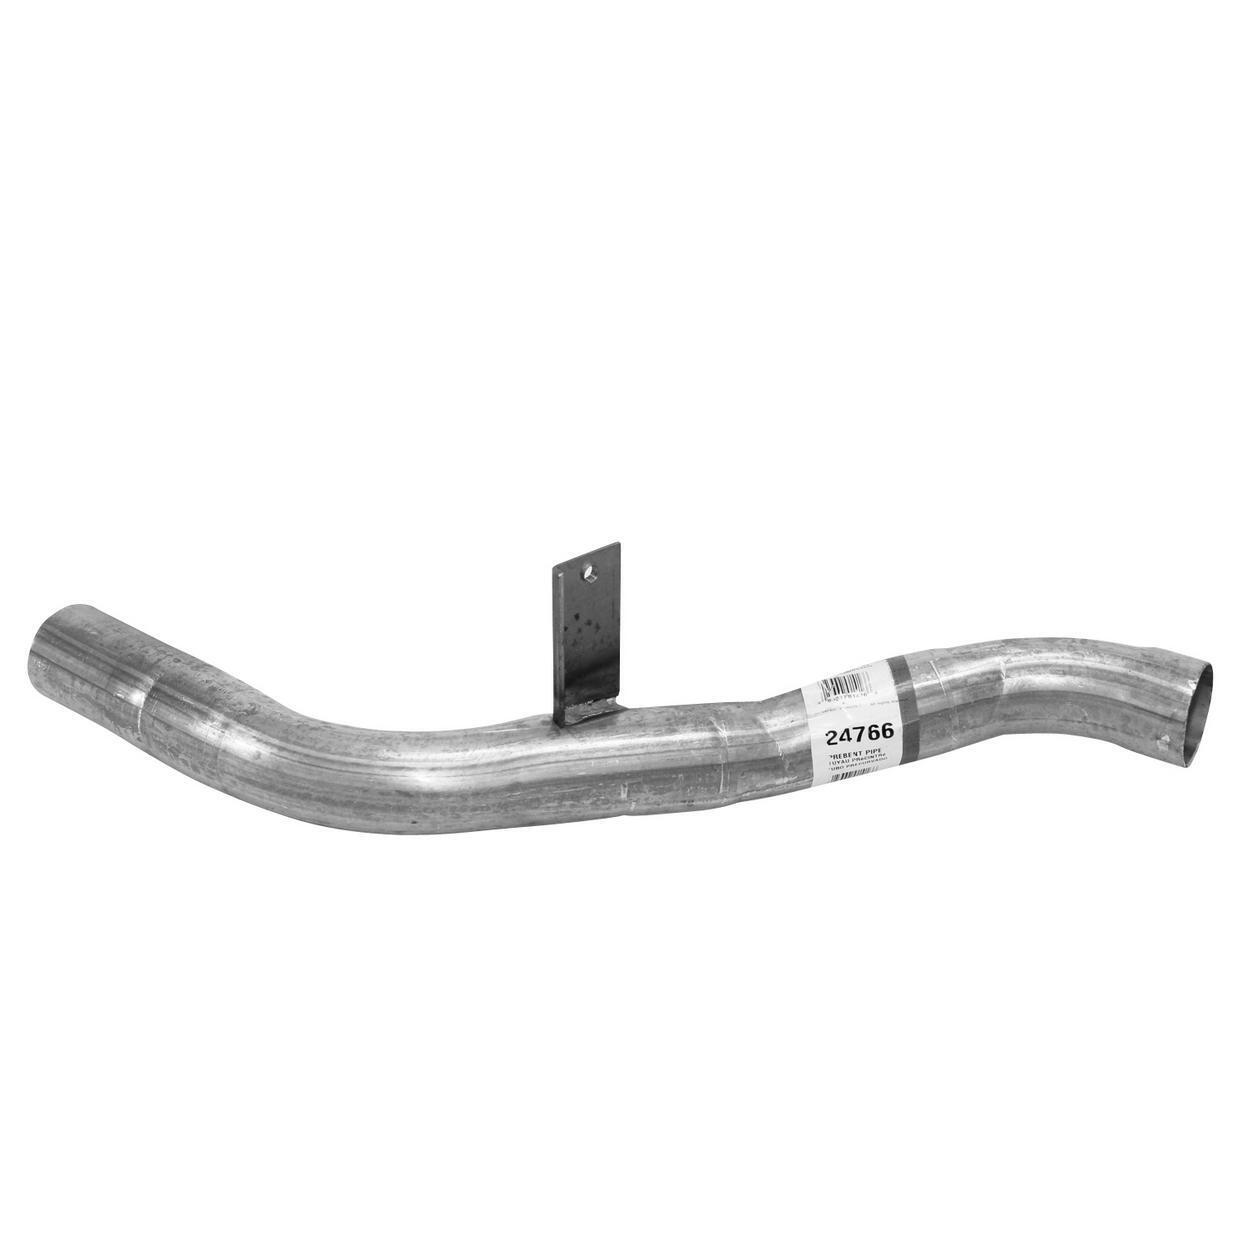 Exhaust Tail Pipe for 1986-1989 Pontiac 6000 2.8L V6 GAS OHV